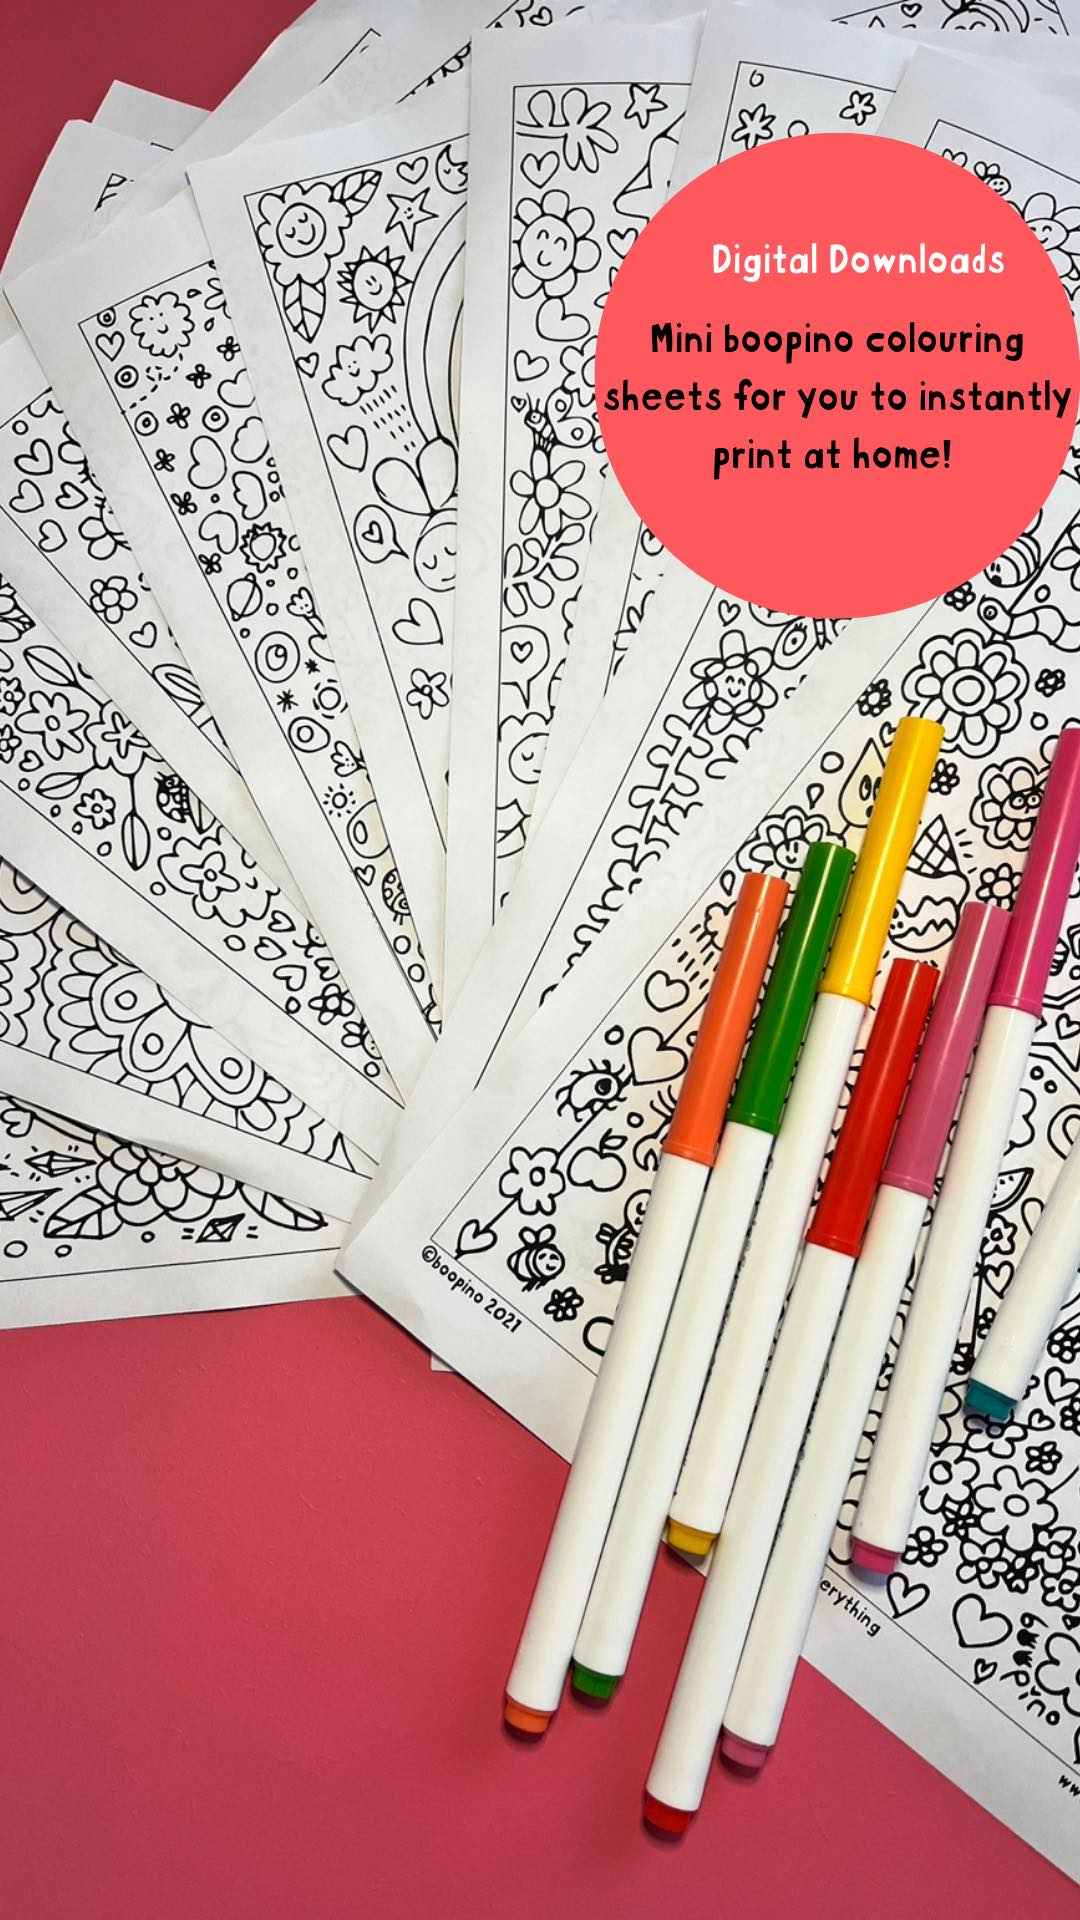 Instant colouring sheets